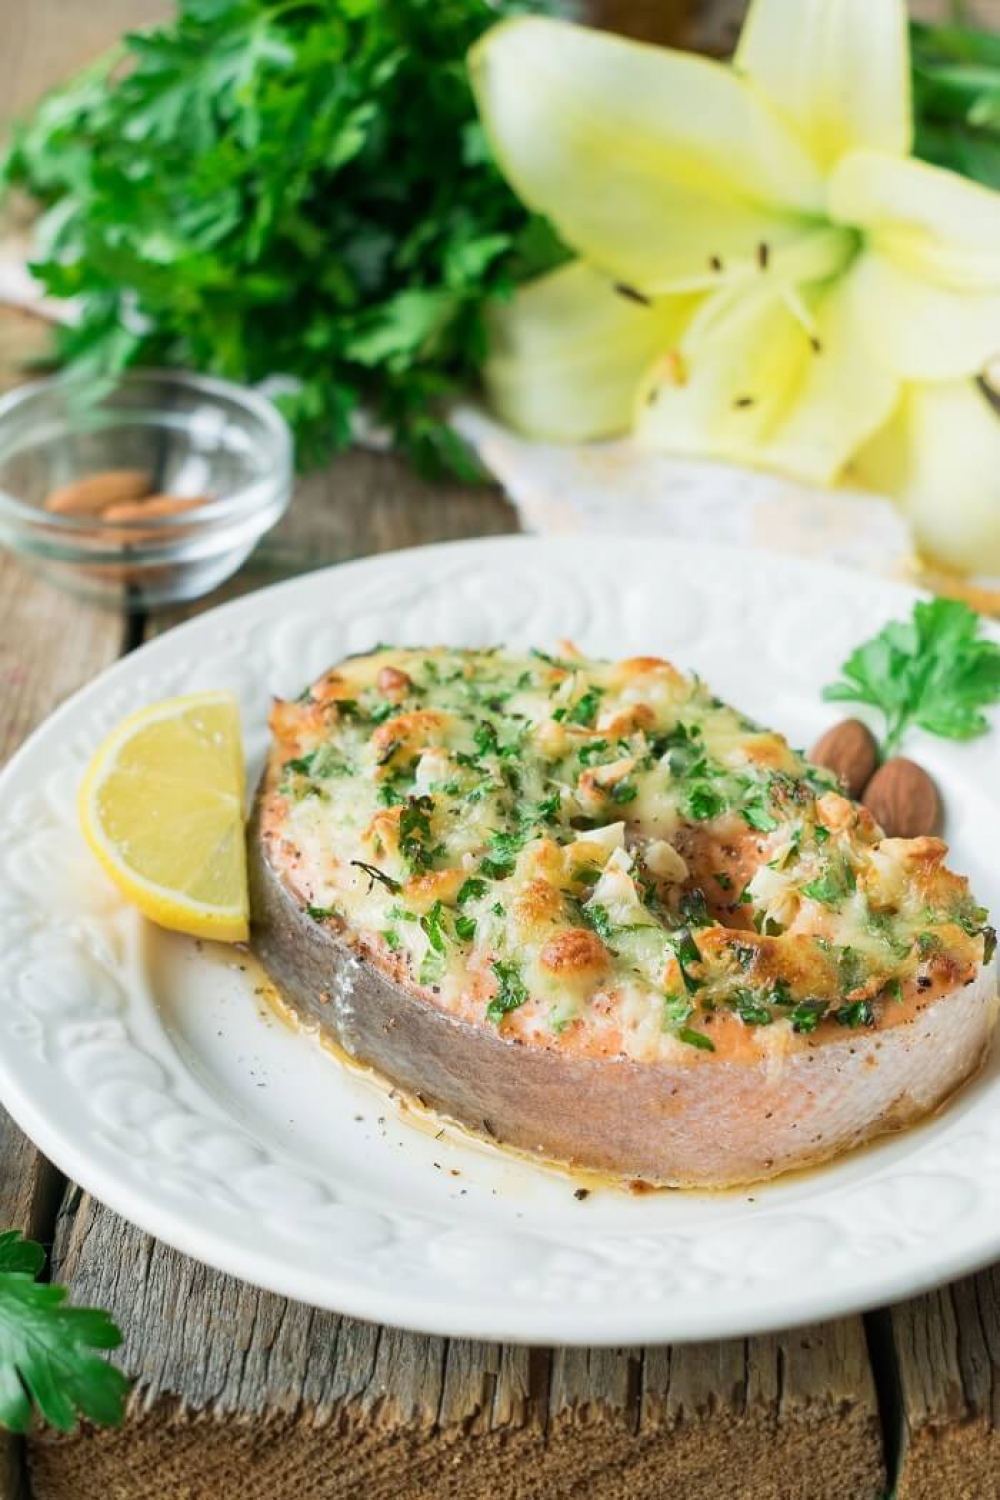 Baked Salmon with Cheese and Almonds